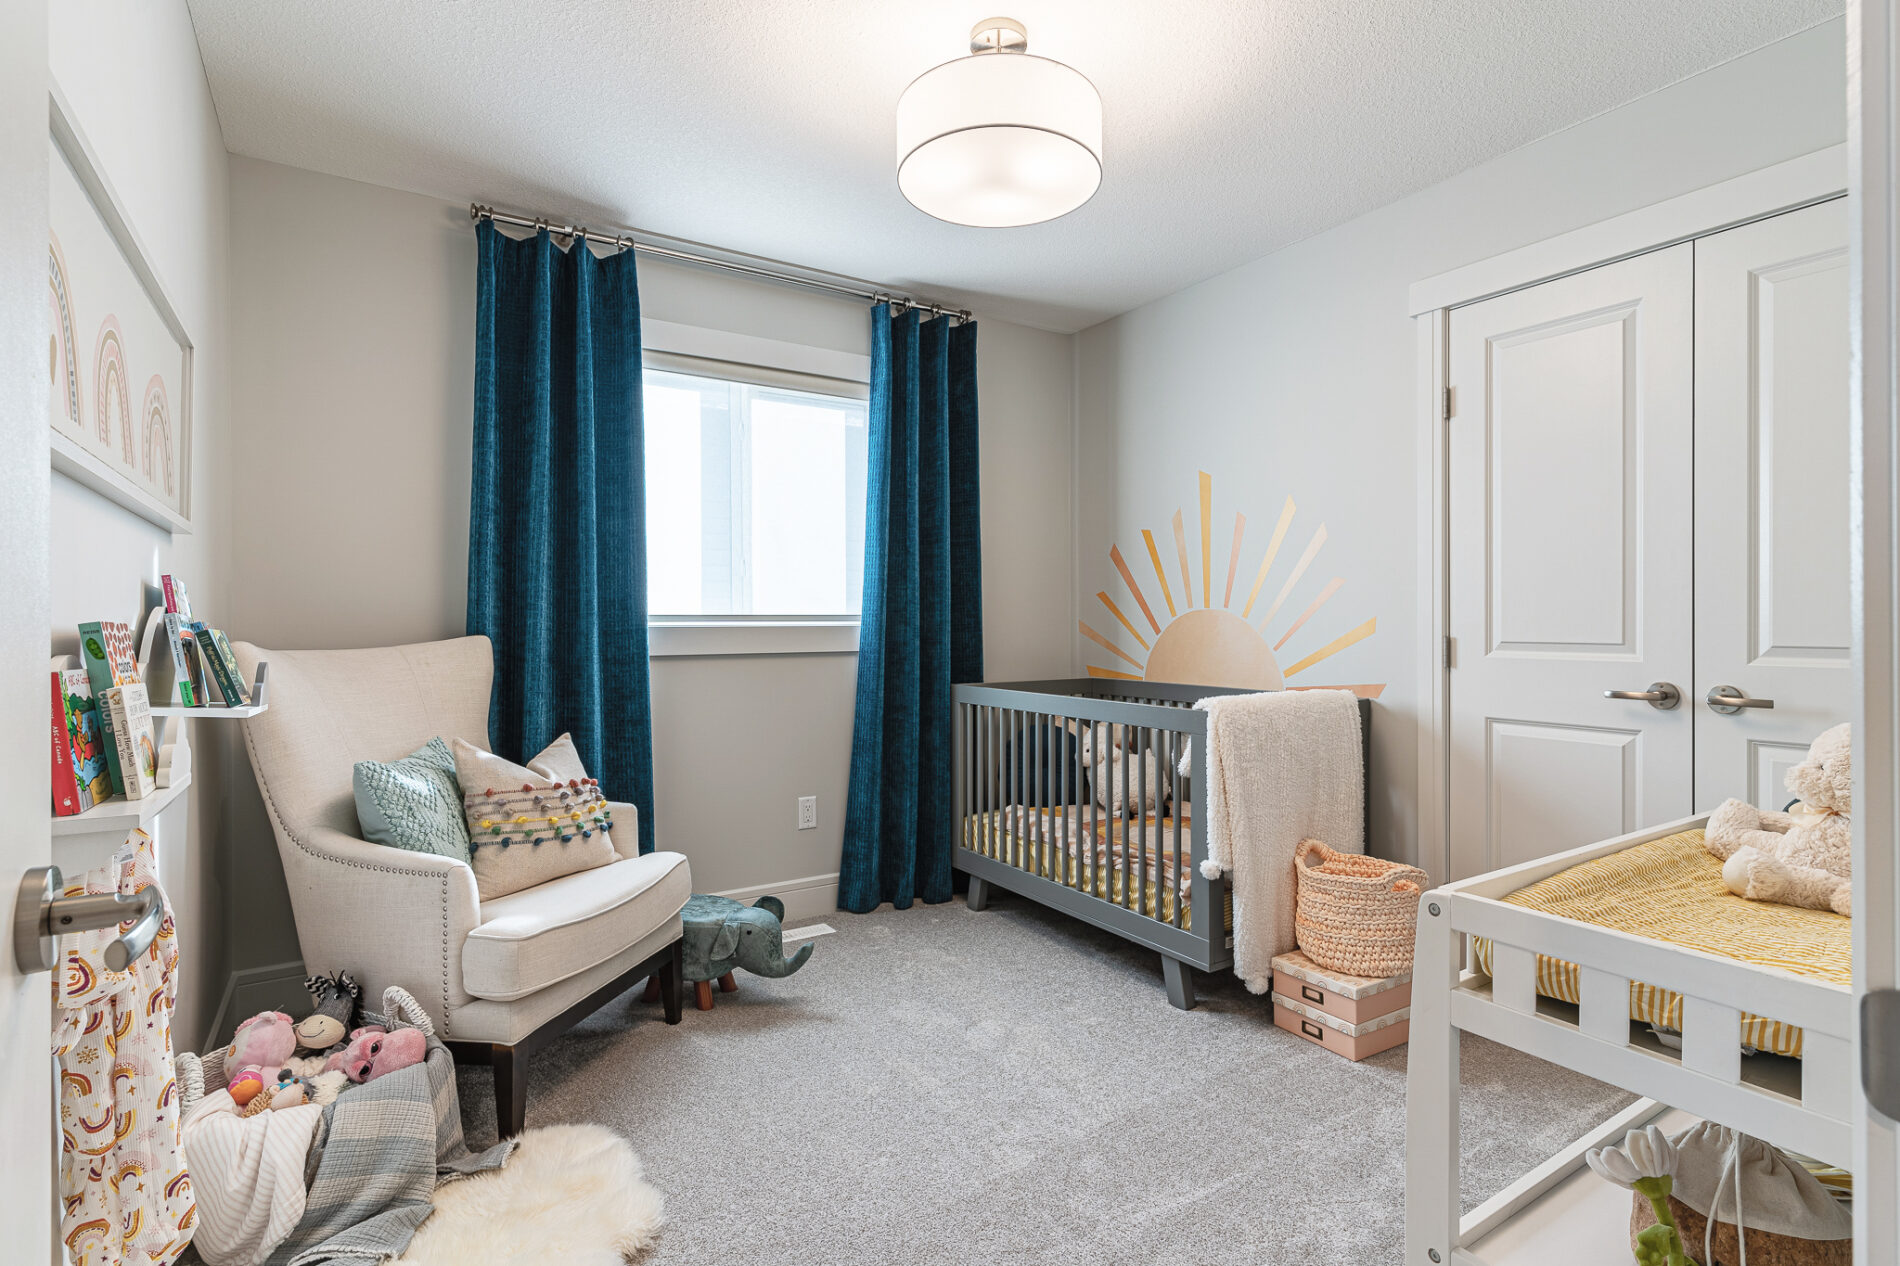 A cozy nursery room with an inviting chair across from the crib which is topped with a sun mural on the wall